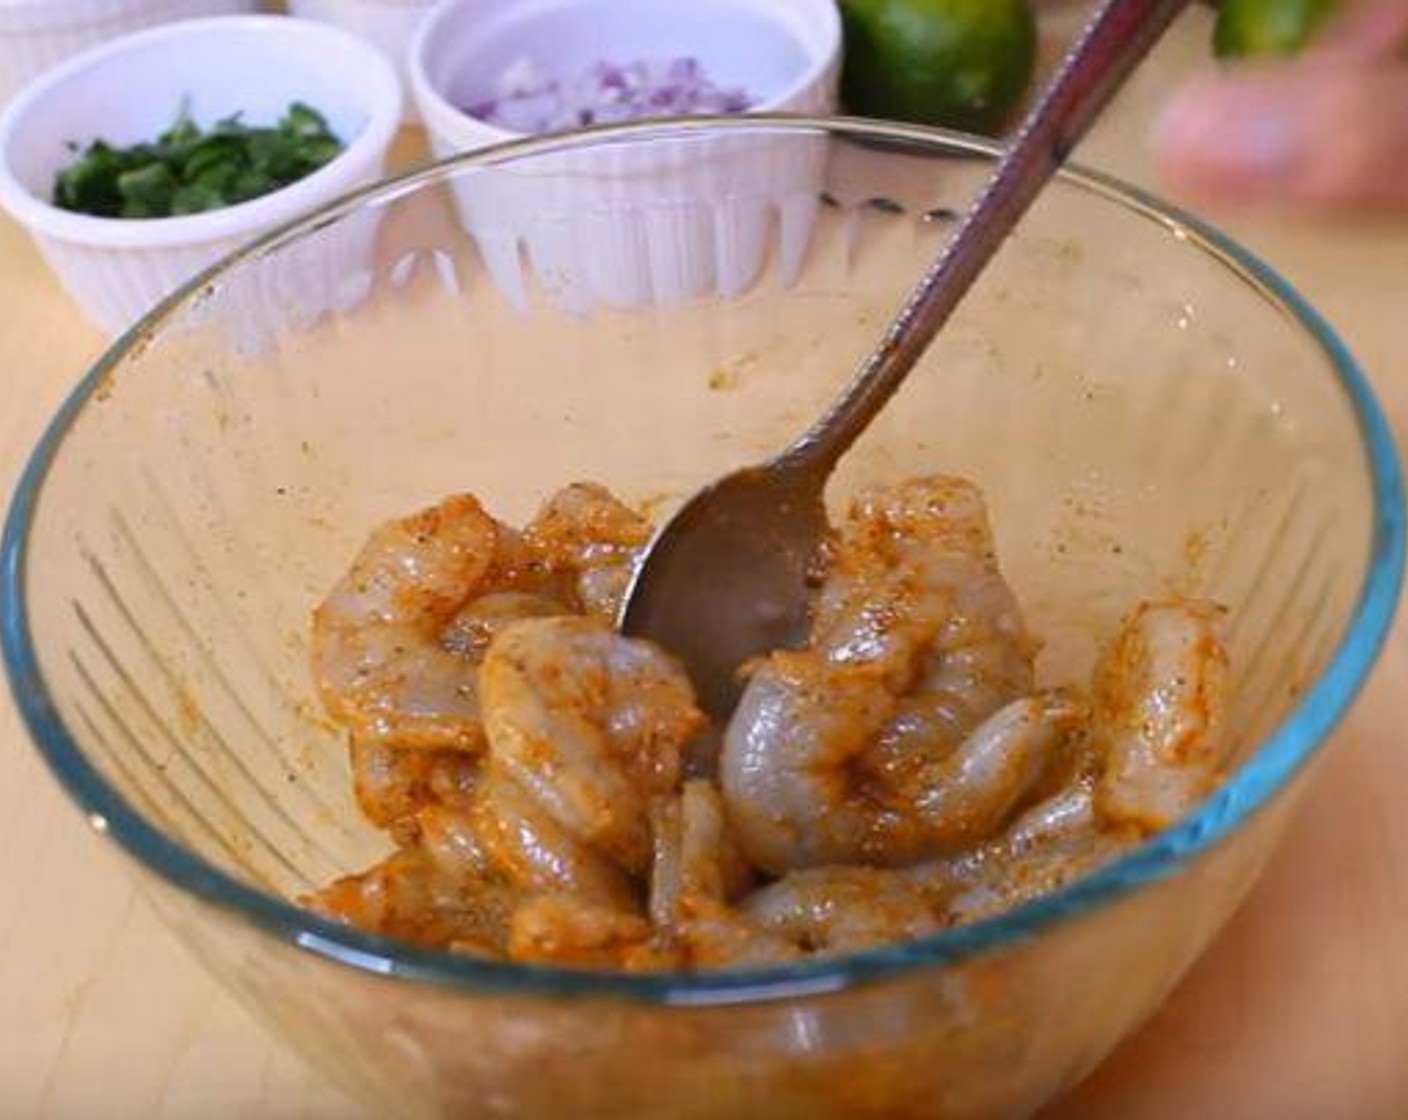 step 1 In a bowl, season the Shrimp (1 lb) with Old Bay® Seasoning (1 tsp), McCormick® Garlic Powder (1/4 tsp), and Olive Oil (1 Tbsp).